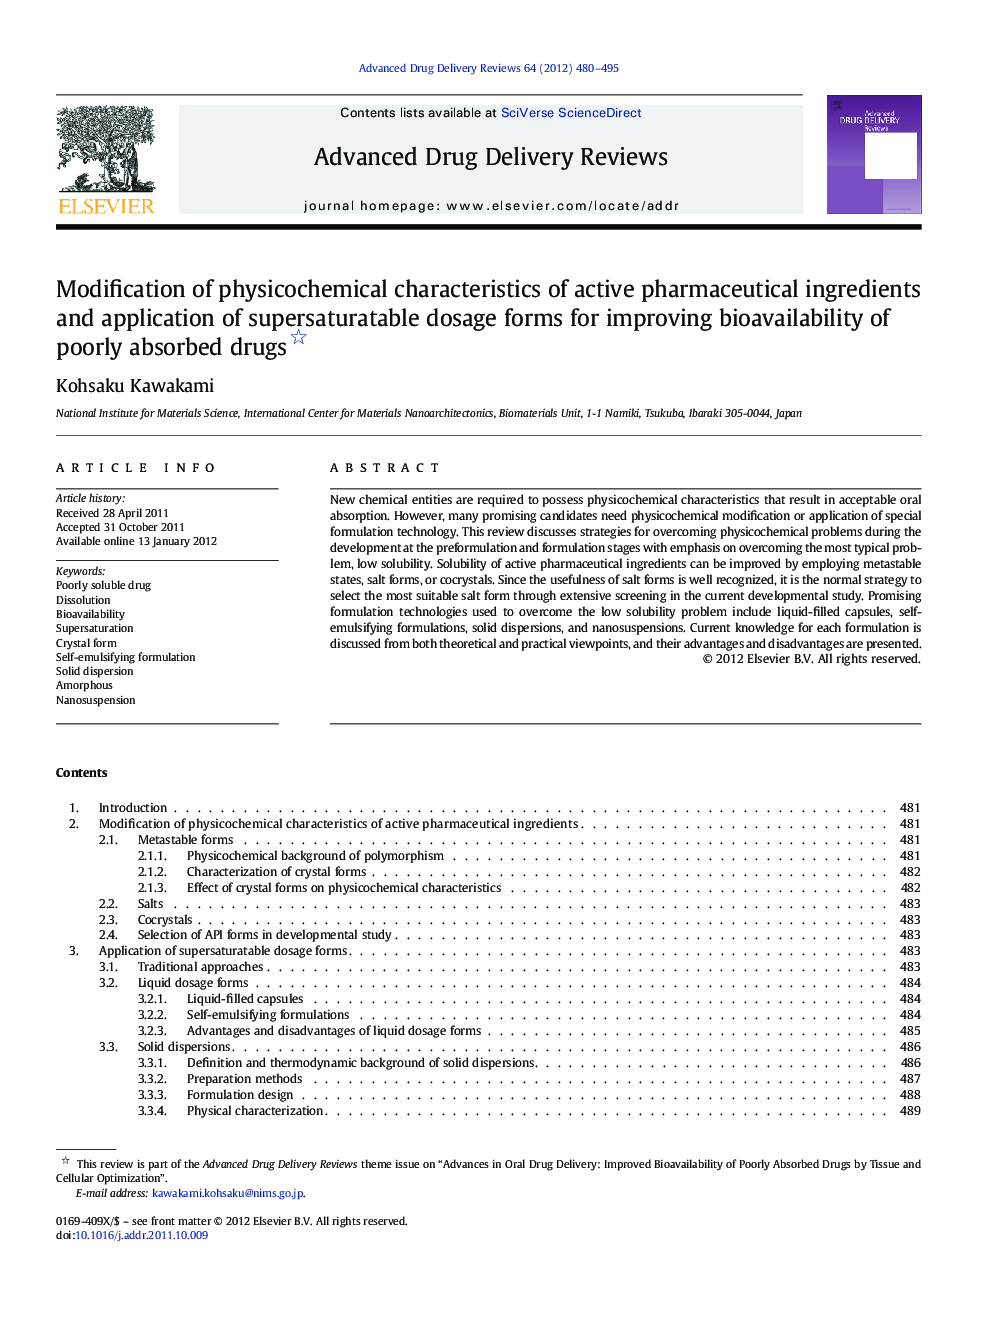 Modification of physicochemical characteristics of active pharmaceutical ingredients and application of supersaturatable dosage forms for improving bioavailability of poorly absorbed drugs 